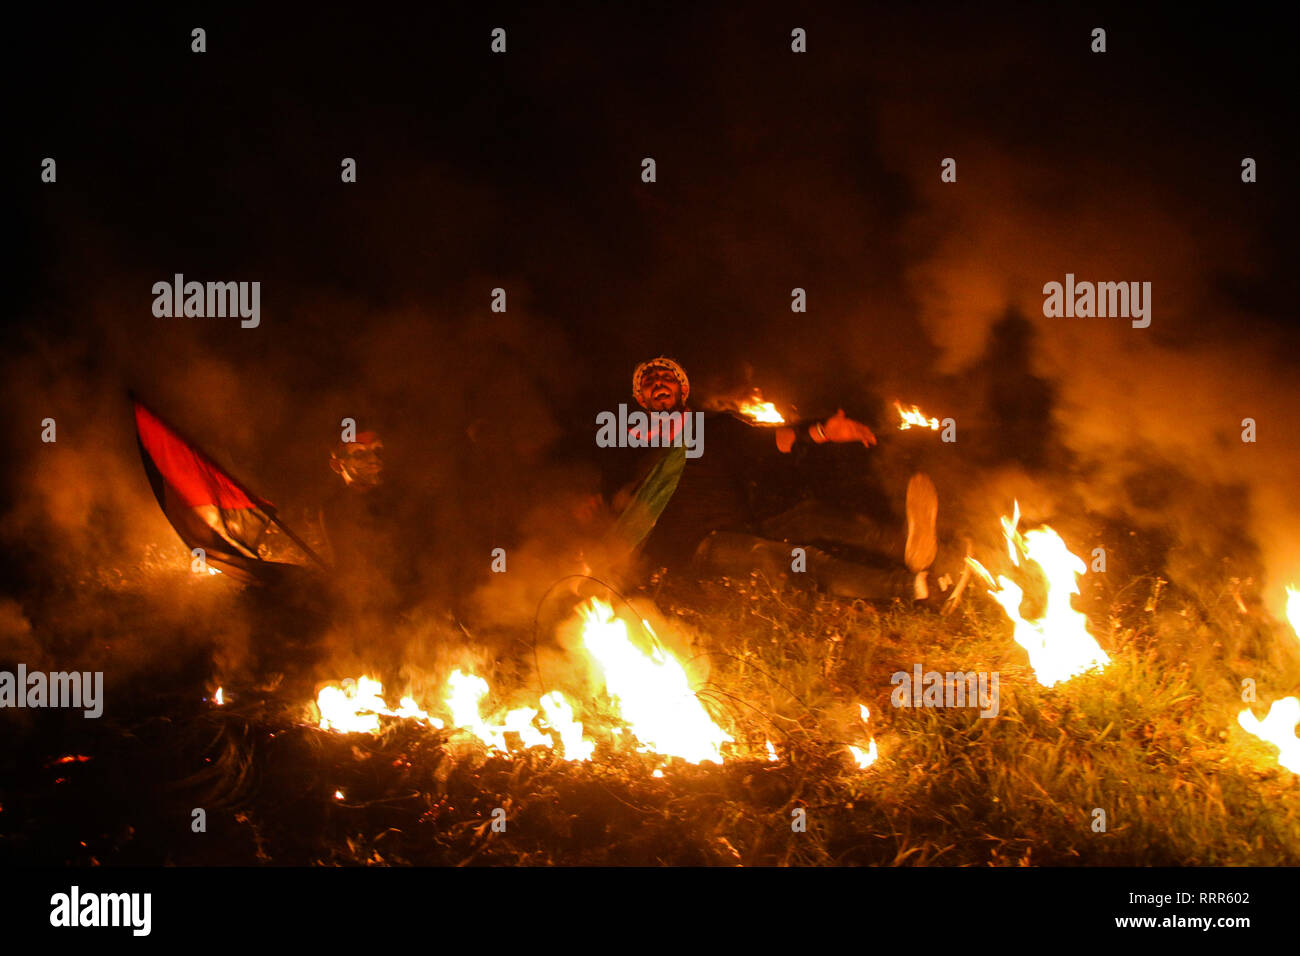 Gaza, Palestine. 26 February 2019. The 'Night Confusion'' unit hold a protest in the Malika area on the east of Gaza City, near the border with Israel, raising the Palestinian flags and setting tires on fire. Some Palestinians in Gaza known as the ''Night Confusion'' unit has begun organizing night demonstrations, during which they set tires on fire and chant slogans in protest against the tight Israeli siege on Gaza. Credit: ZUMA Press, Inc./Alamy Live News Stock Photo